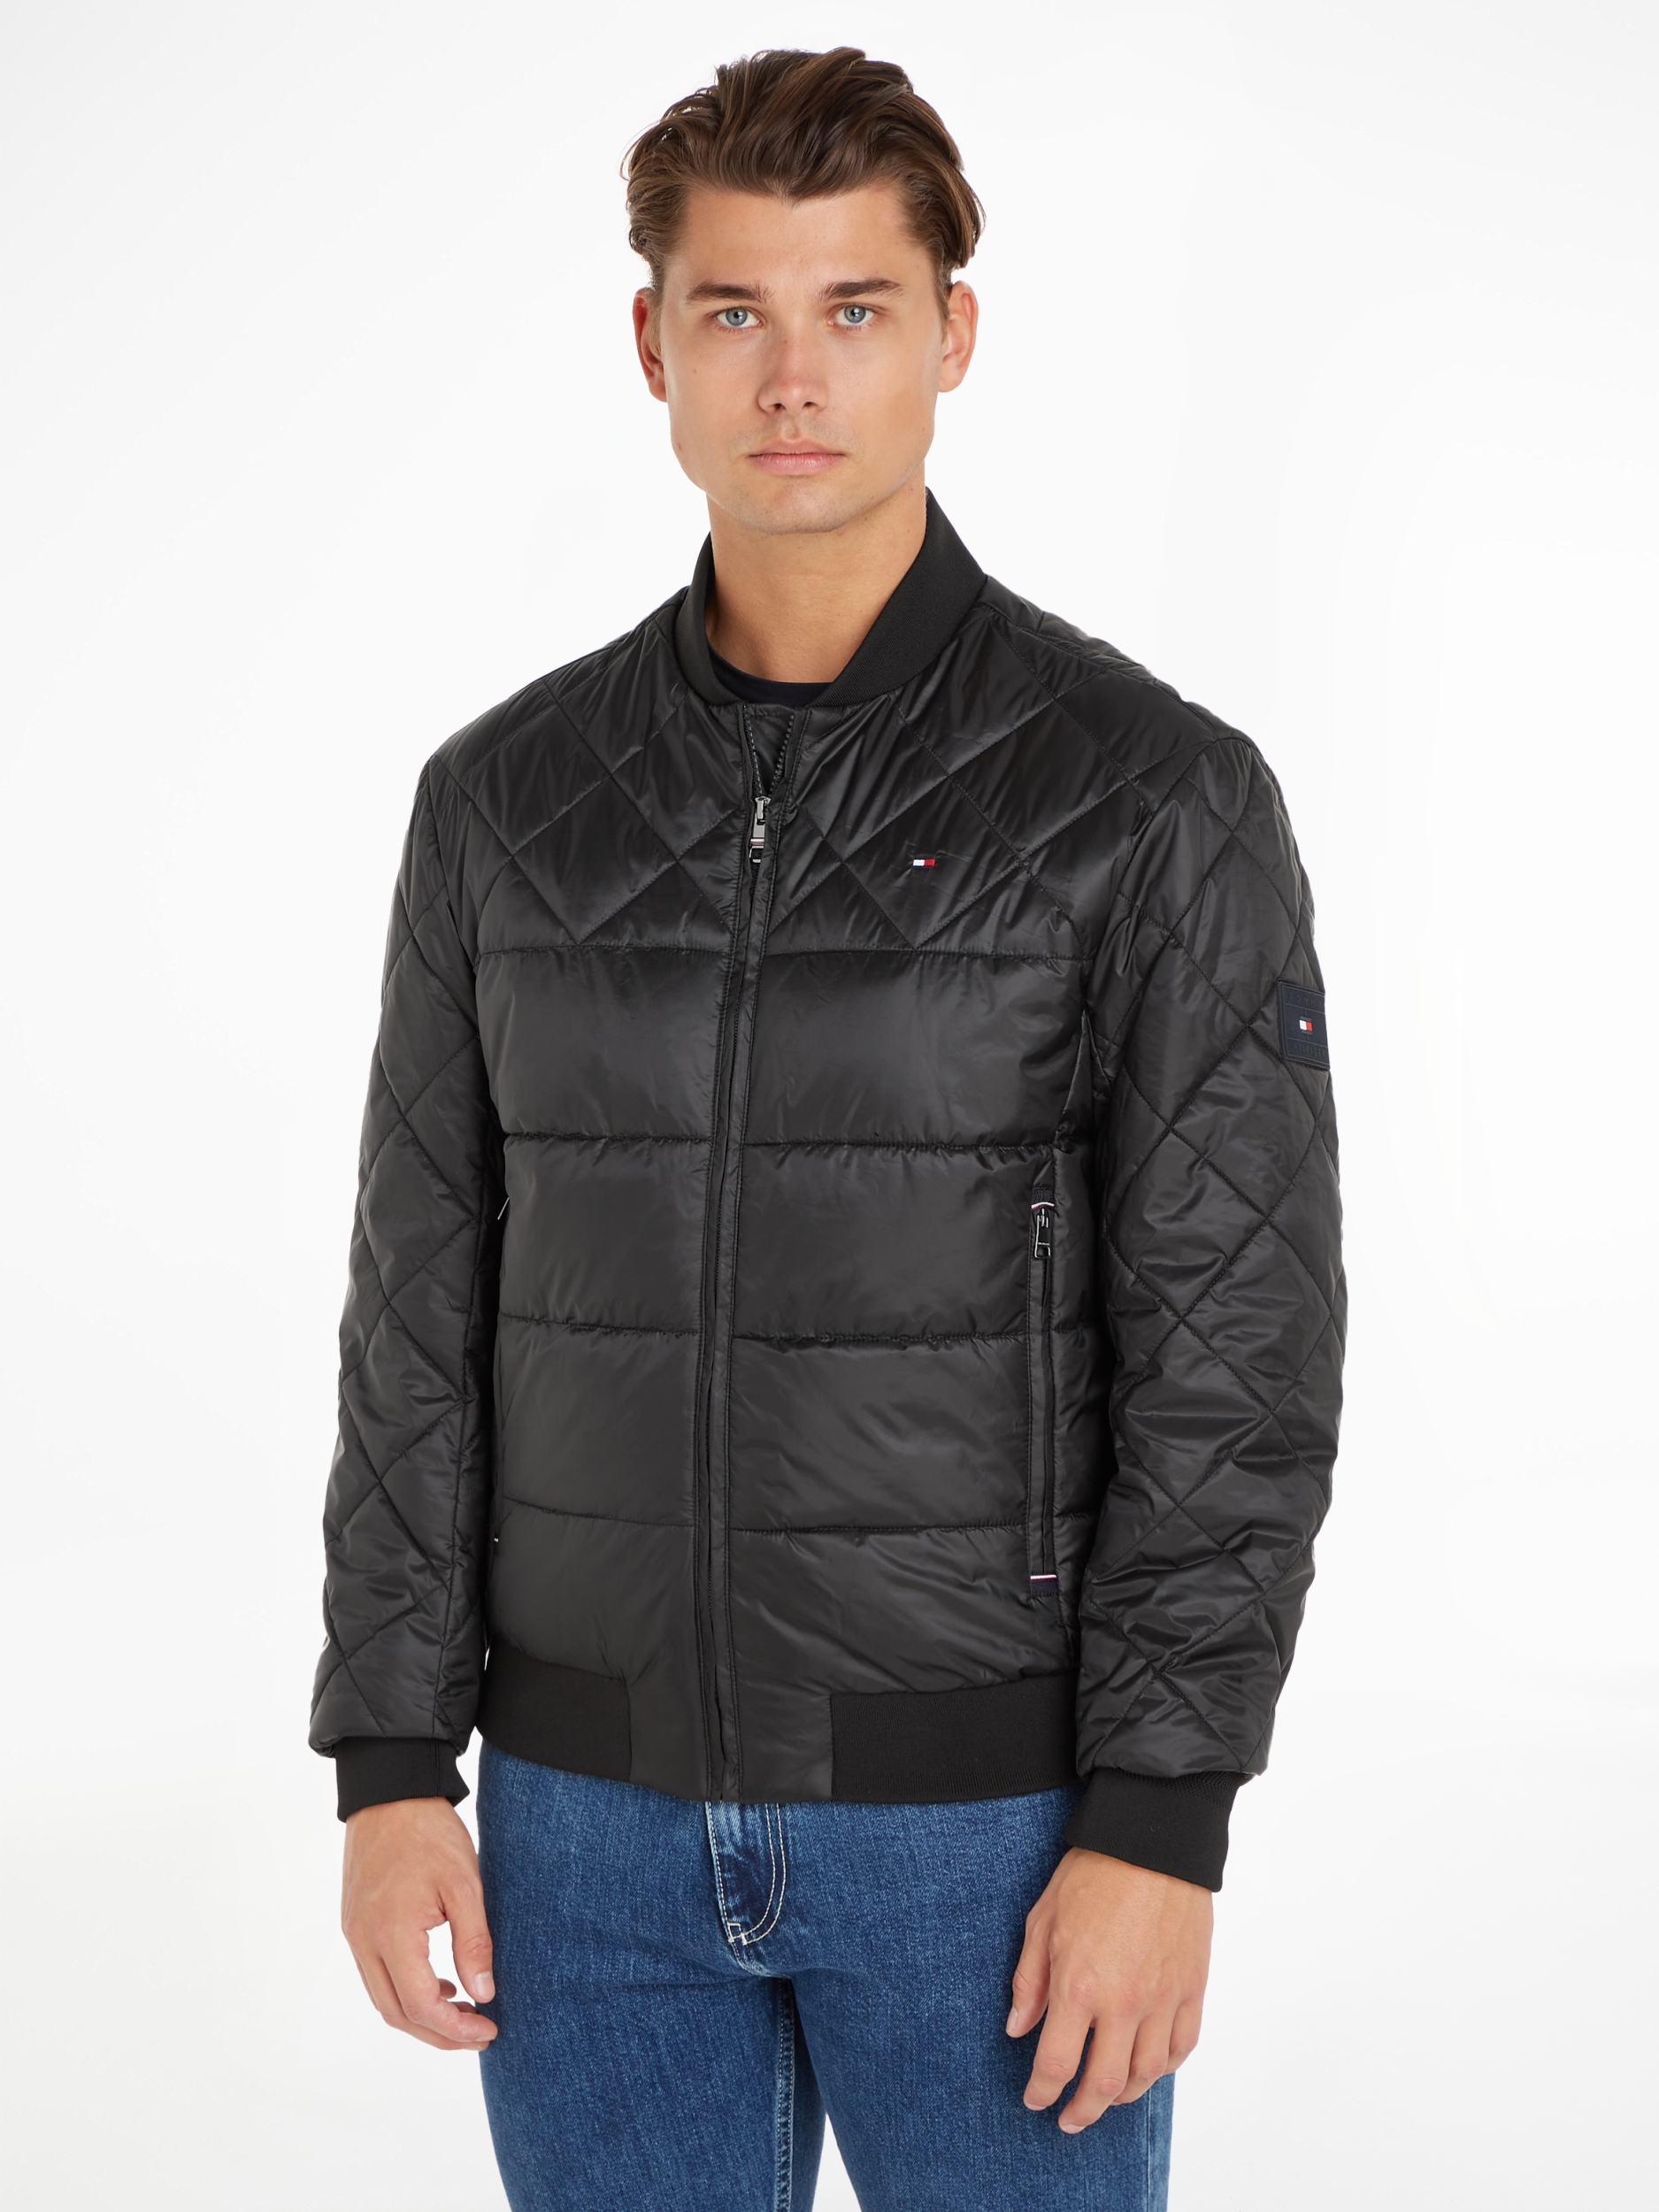 PACKABLE RECYCLED | black XL | MW0MW31633-BDS-XL | BOMBER